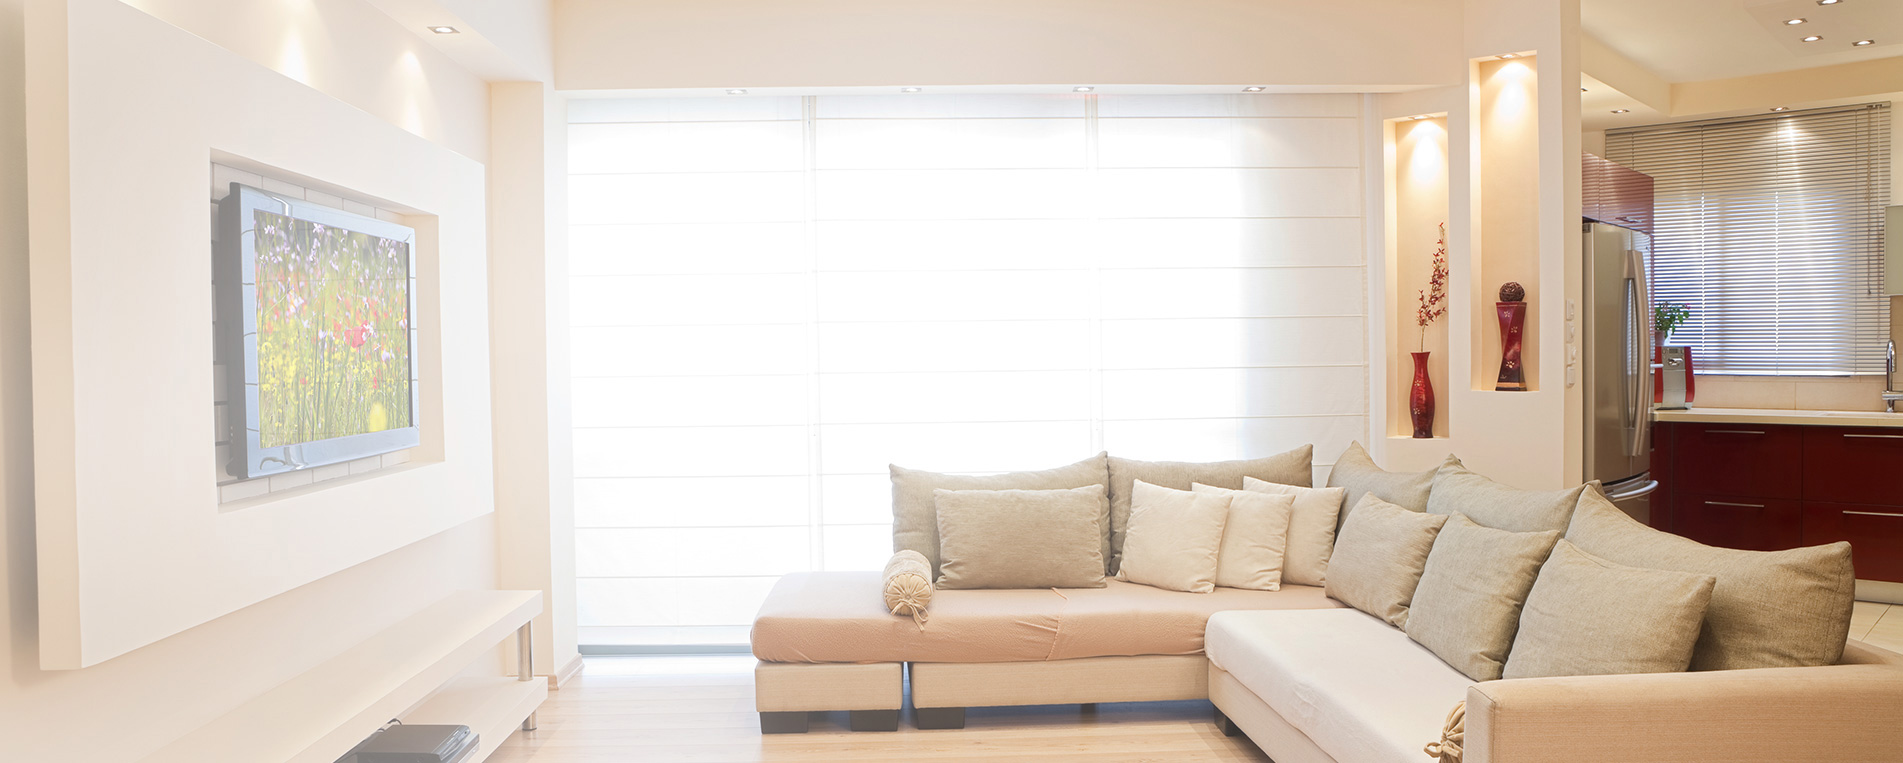 Different Blinds and Shades for Different Homes and Businesses